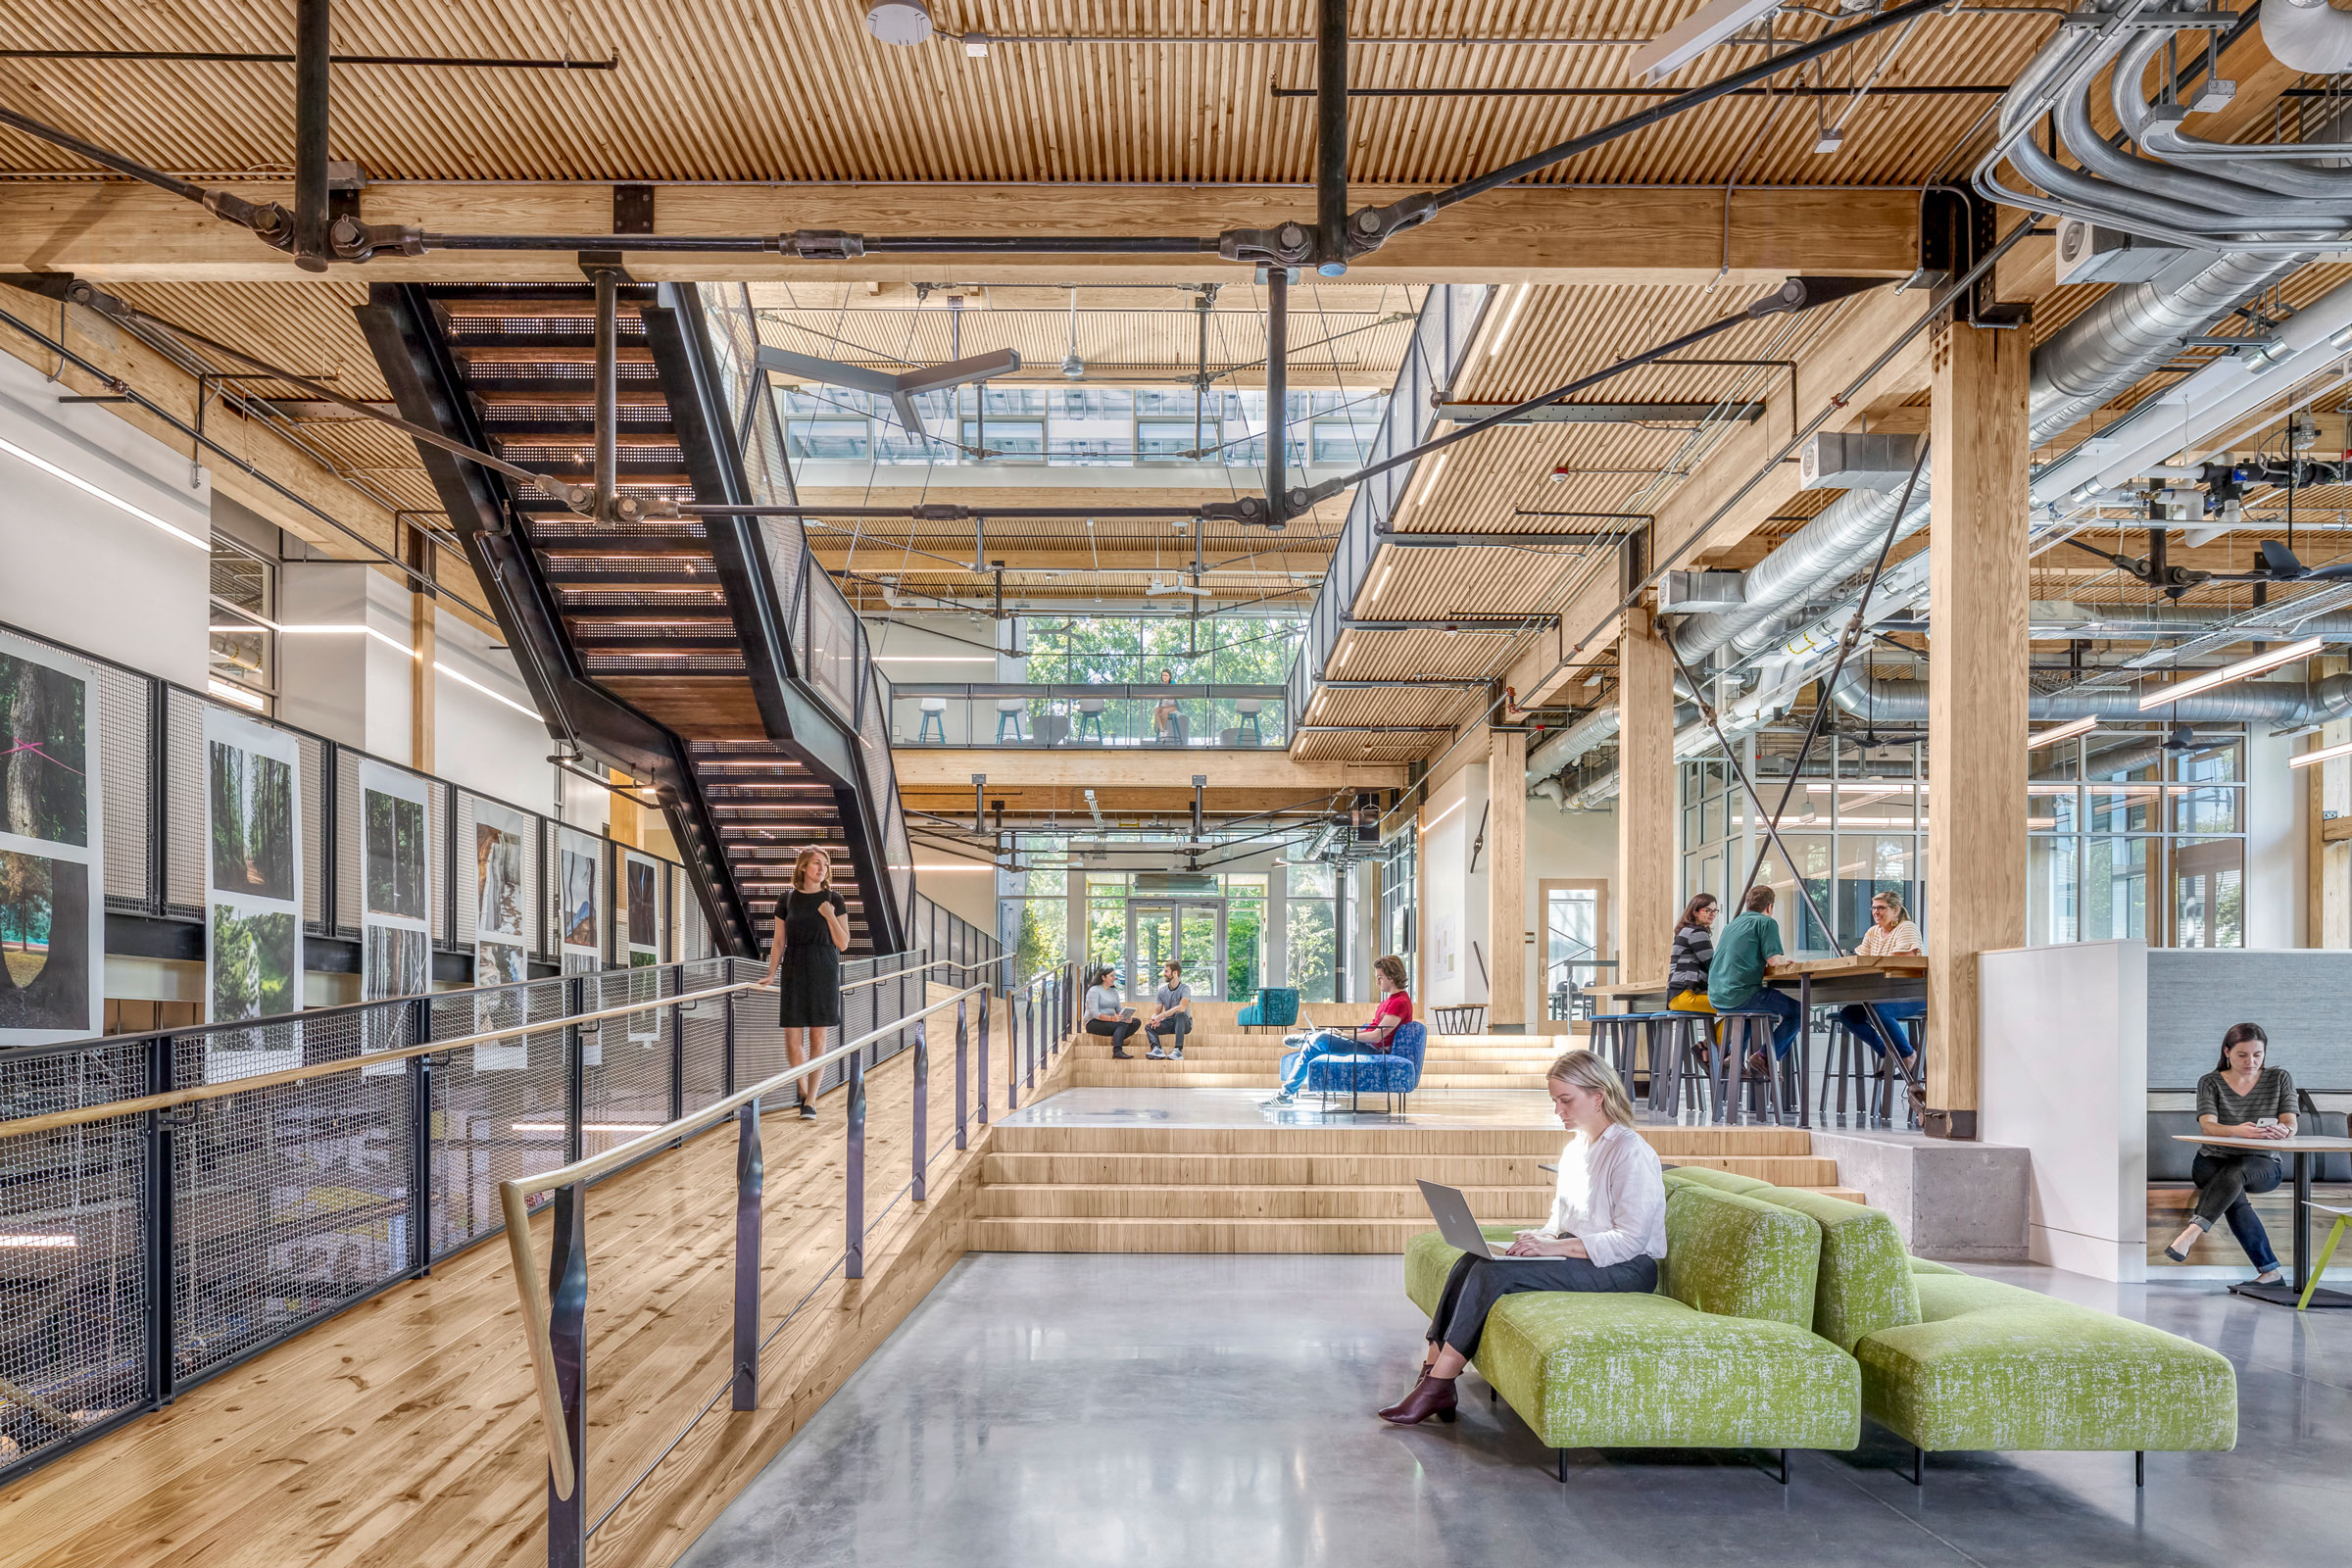 WoodWorks’ Awards Showcase Innovation and Trends in Wood Building Design